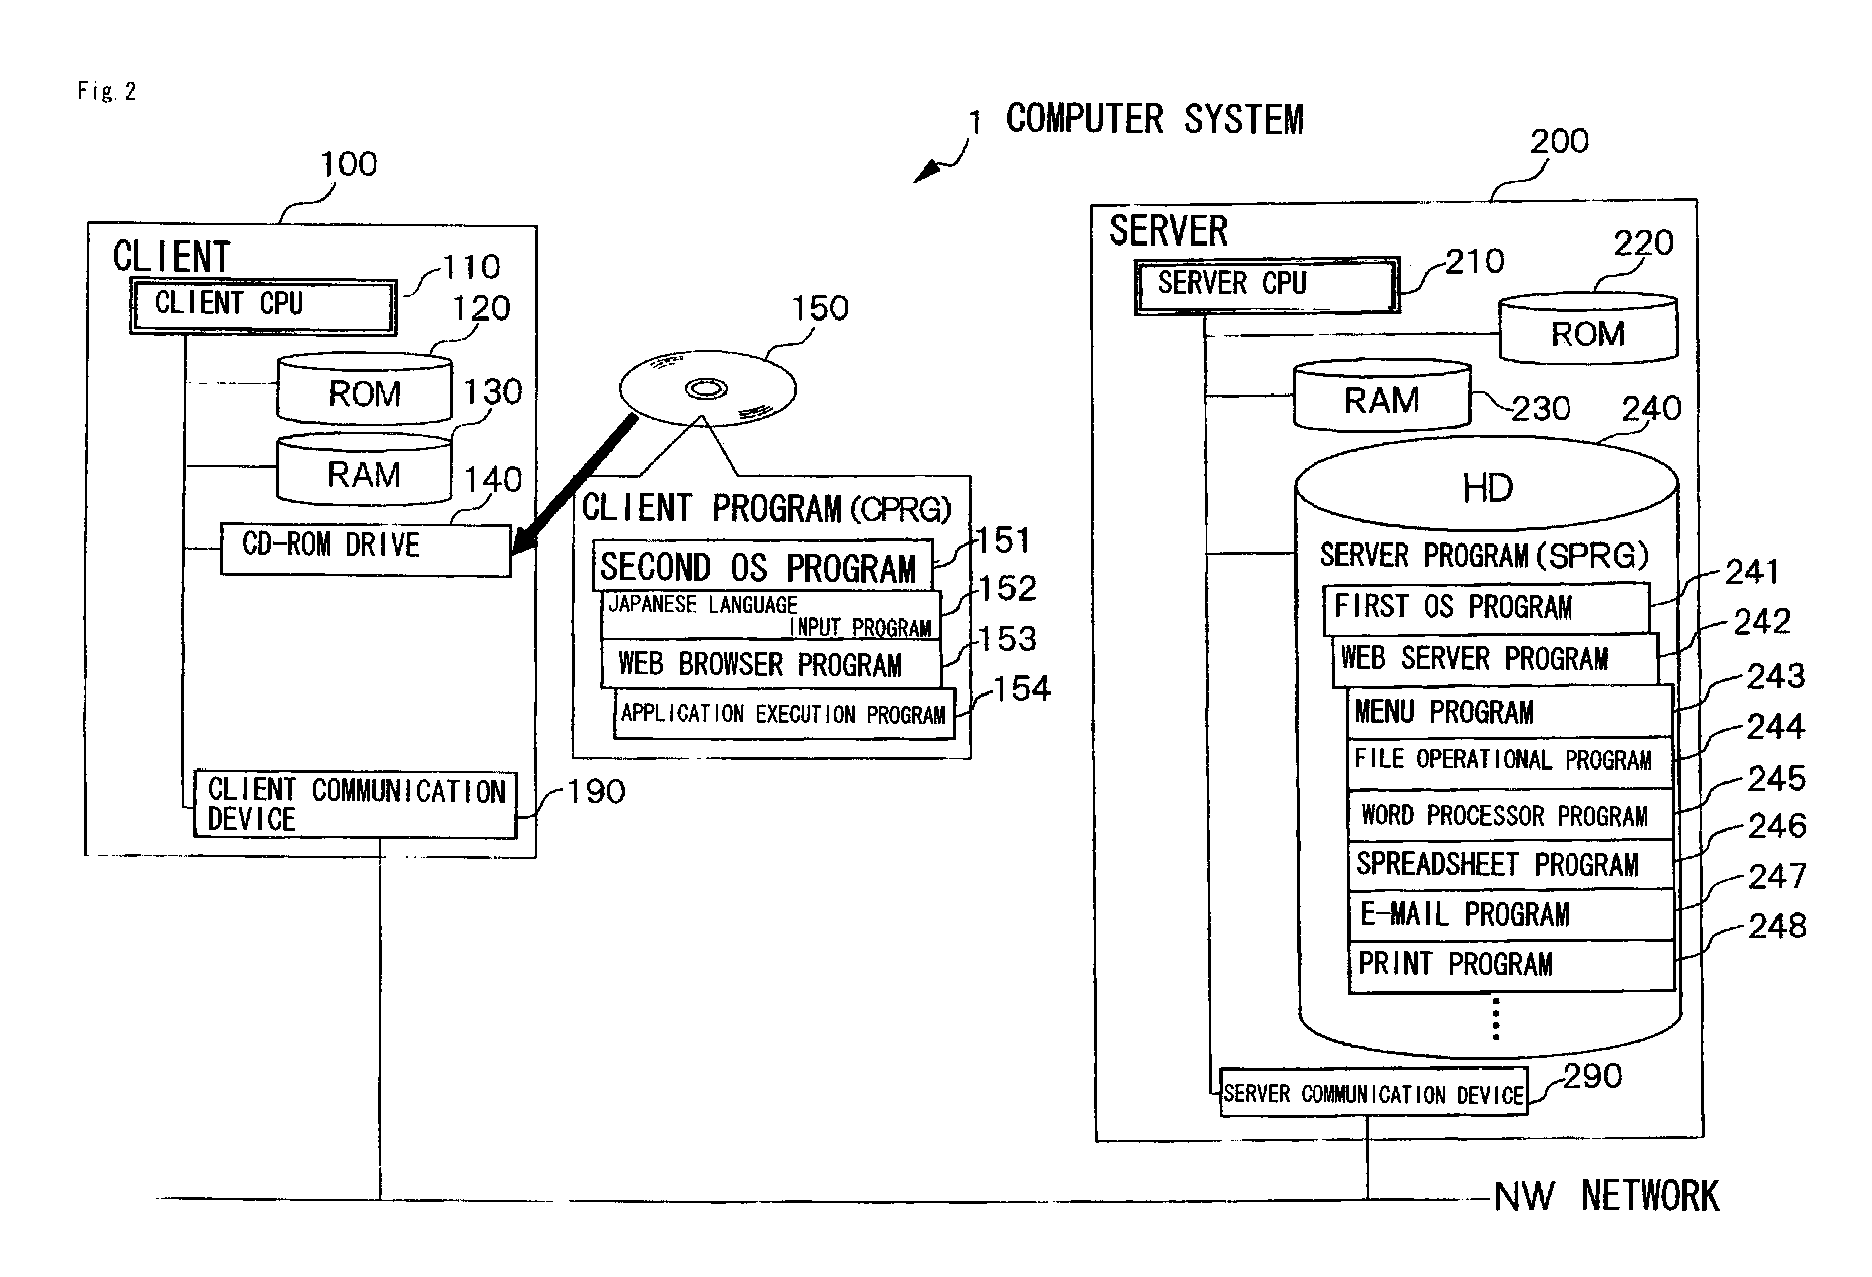 Centralized management type computer system